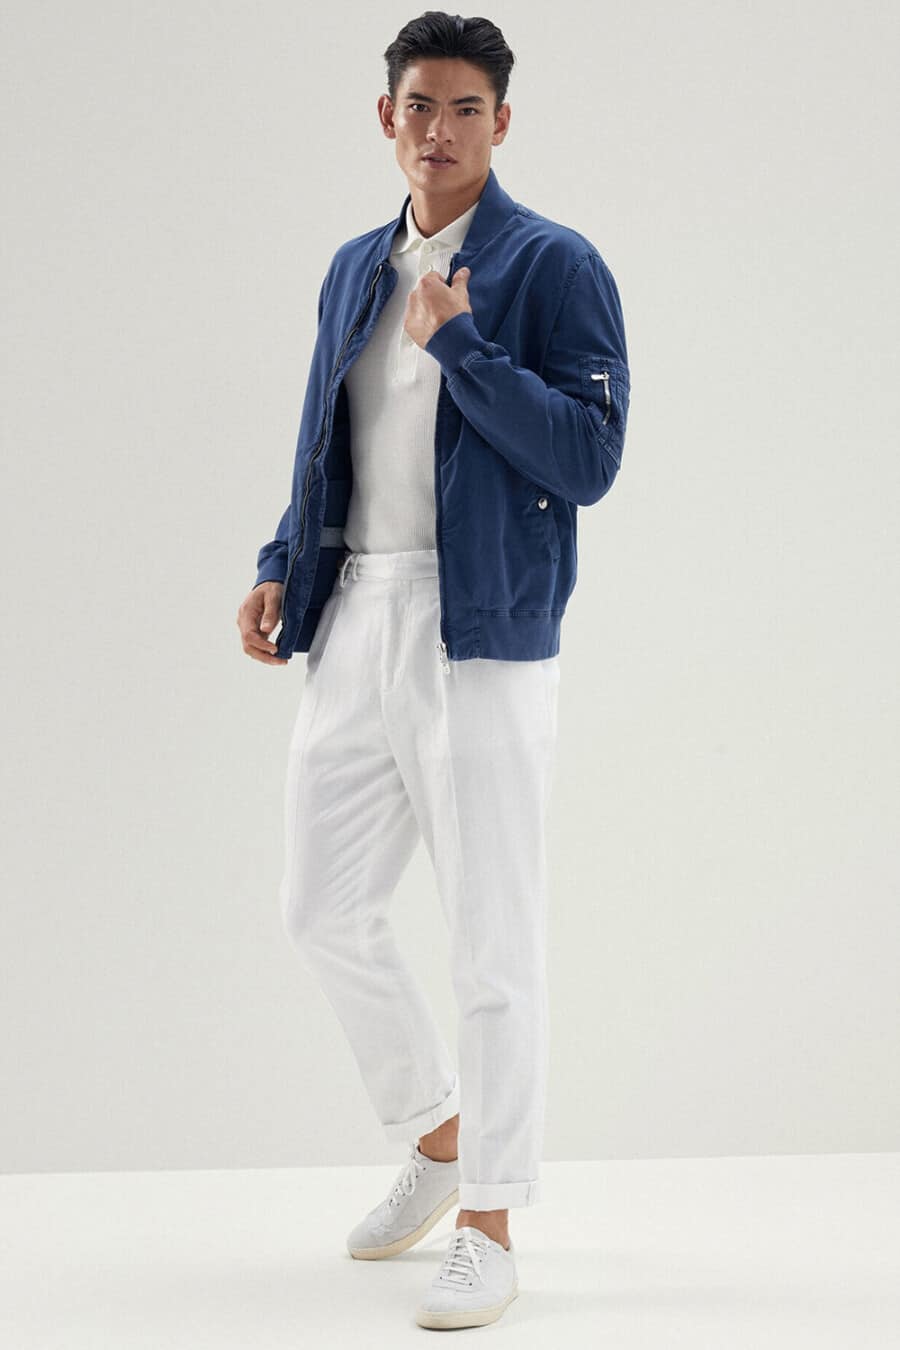 Men's white pants, off-white polo shirt, blue MA-1 bomber jacket and white sneakers outfit